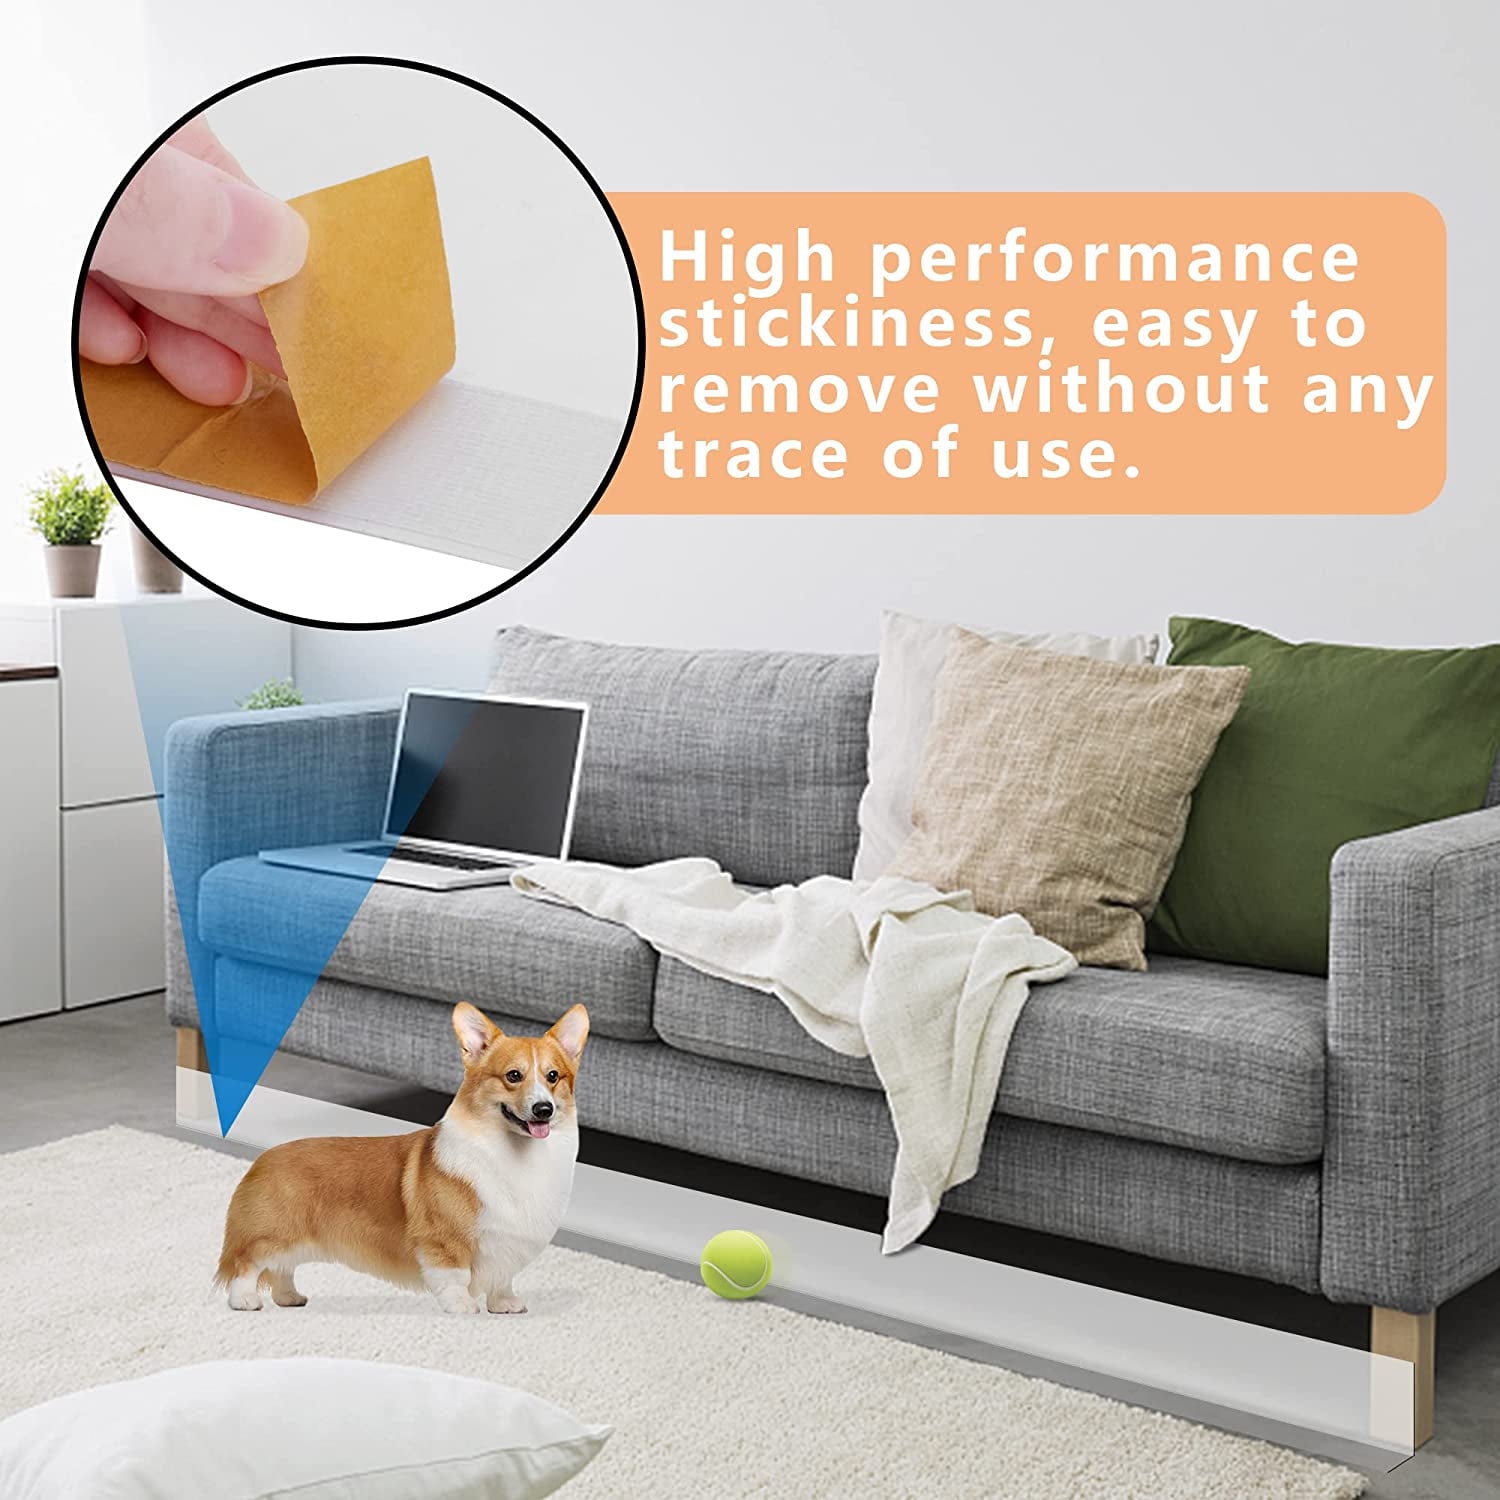  Widen Under Sofa Toy Blocker Adjustable Bumper Under Bed  Blocker for Pets Under Couch Blocker Under Bed Blocker with Adhesive  Mounting Strap for Avoid Things Sliding (32.8 Ft Long, 3 Inch